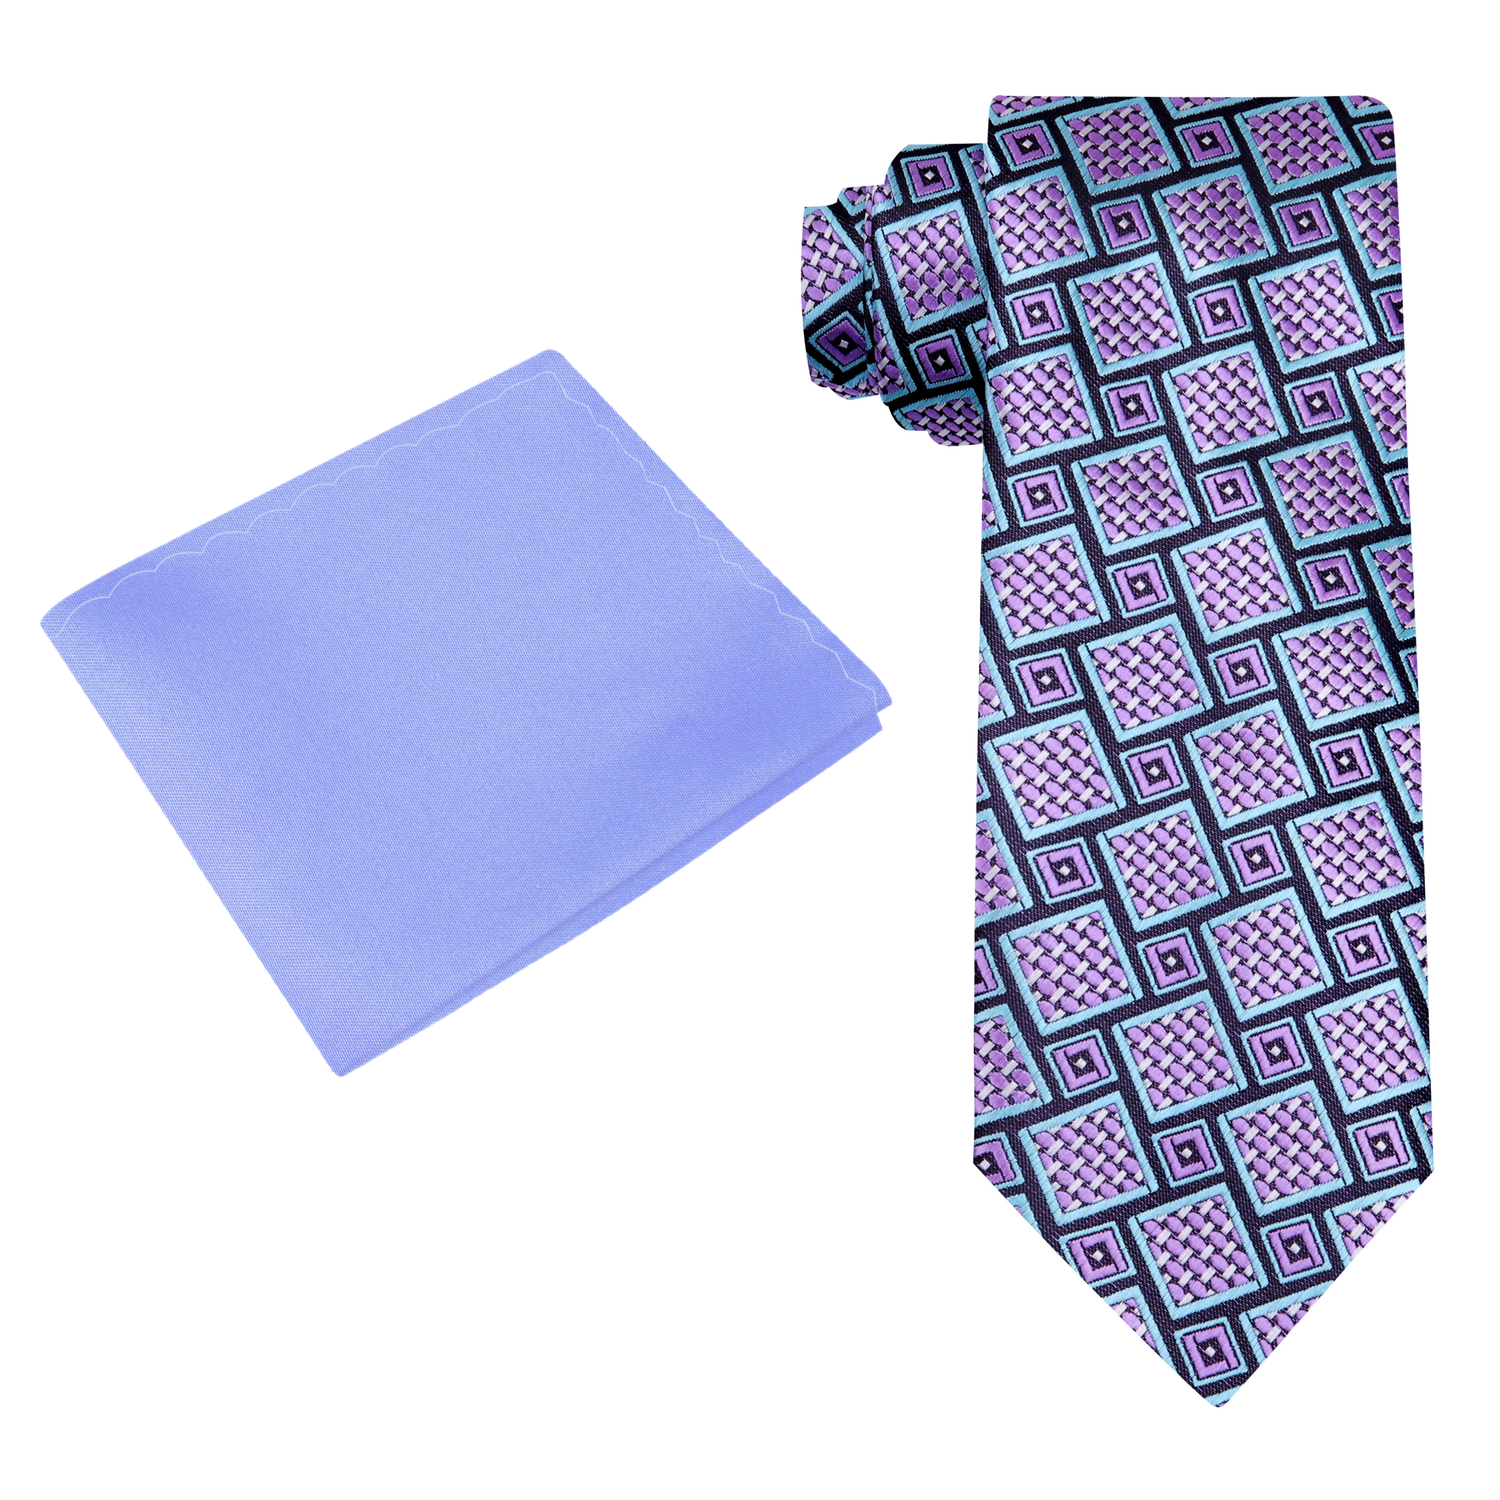 Alt View: A Grey, Teal, Purple Abstract Shapes Pattern Silk Necktie, Pastel Purple Pocket Square